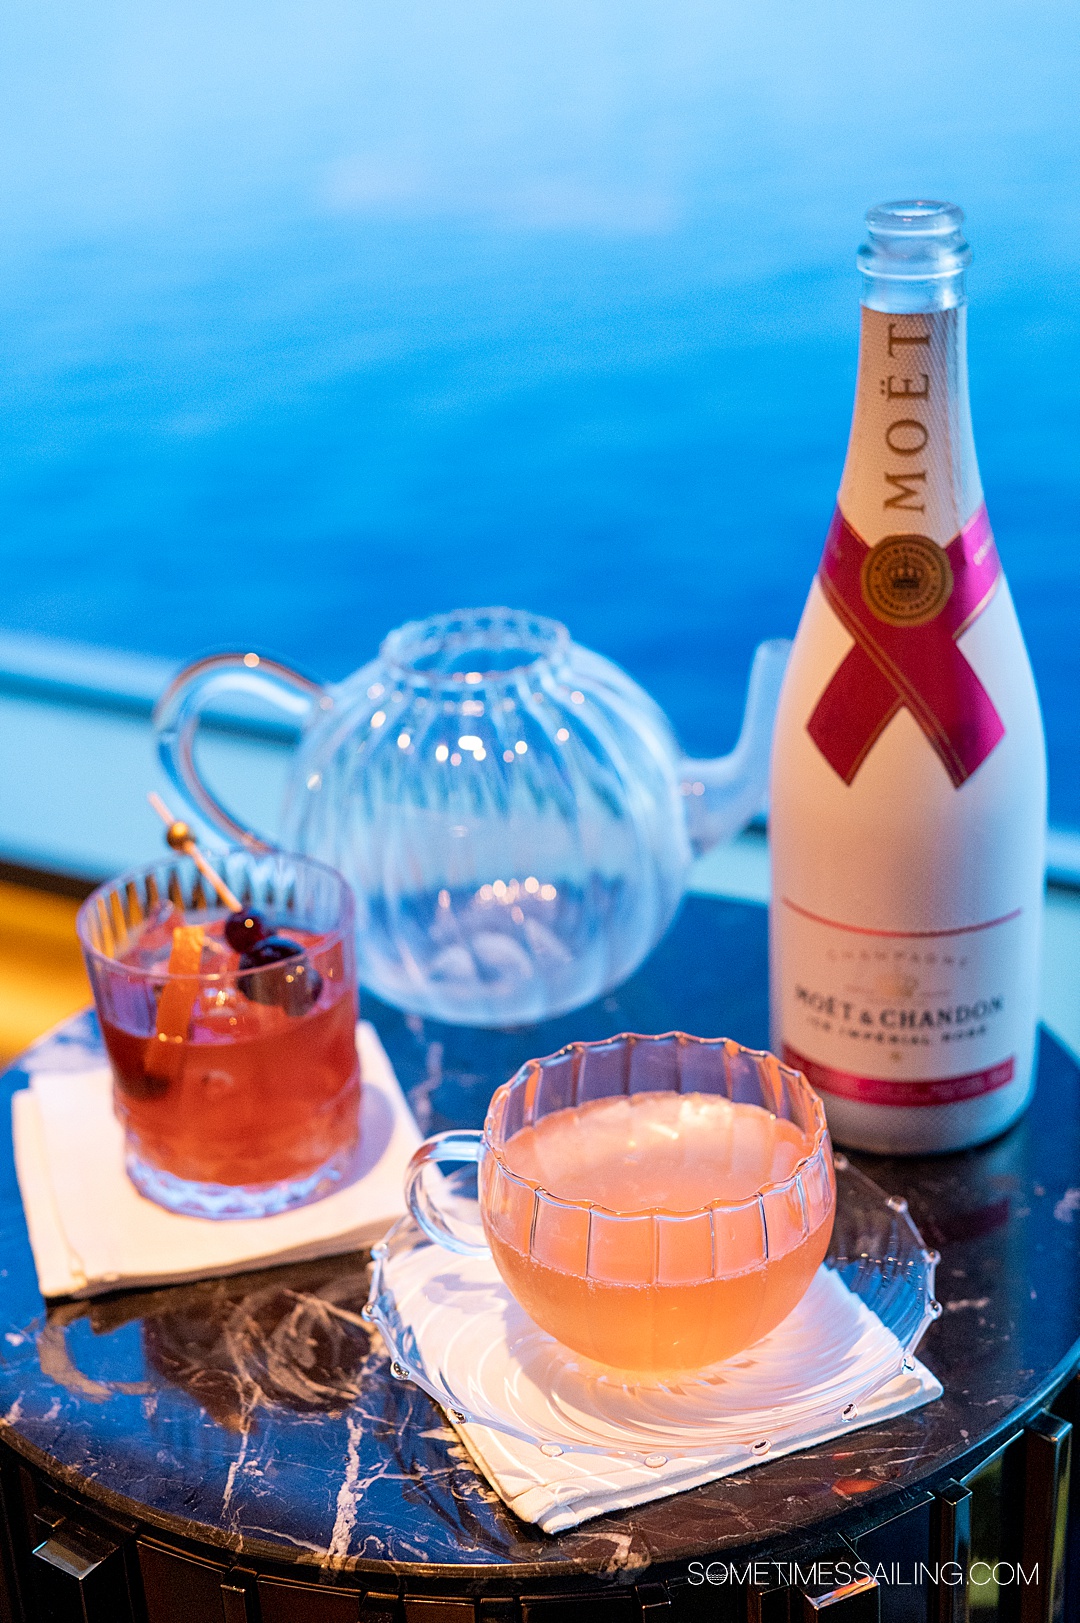 Table with cocktails and a bottle of champagne on the right during dusk, as adults-only on Disney Cruise Line.